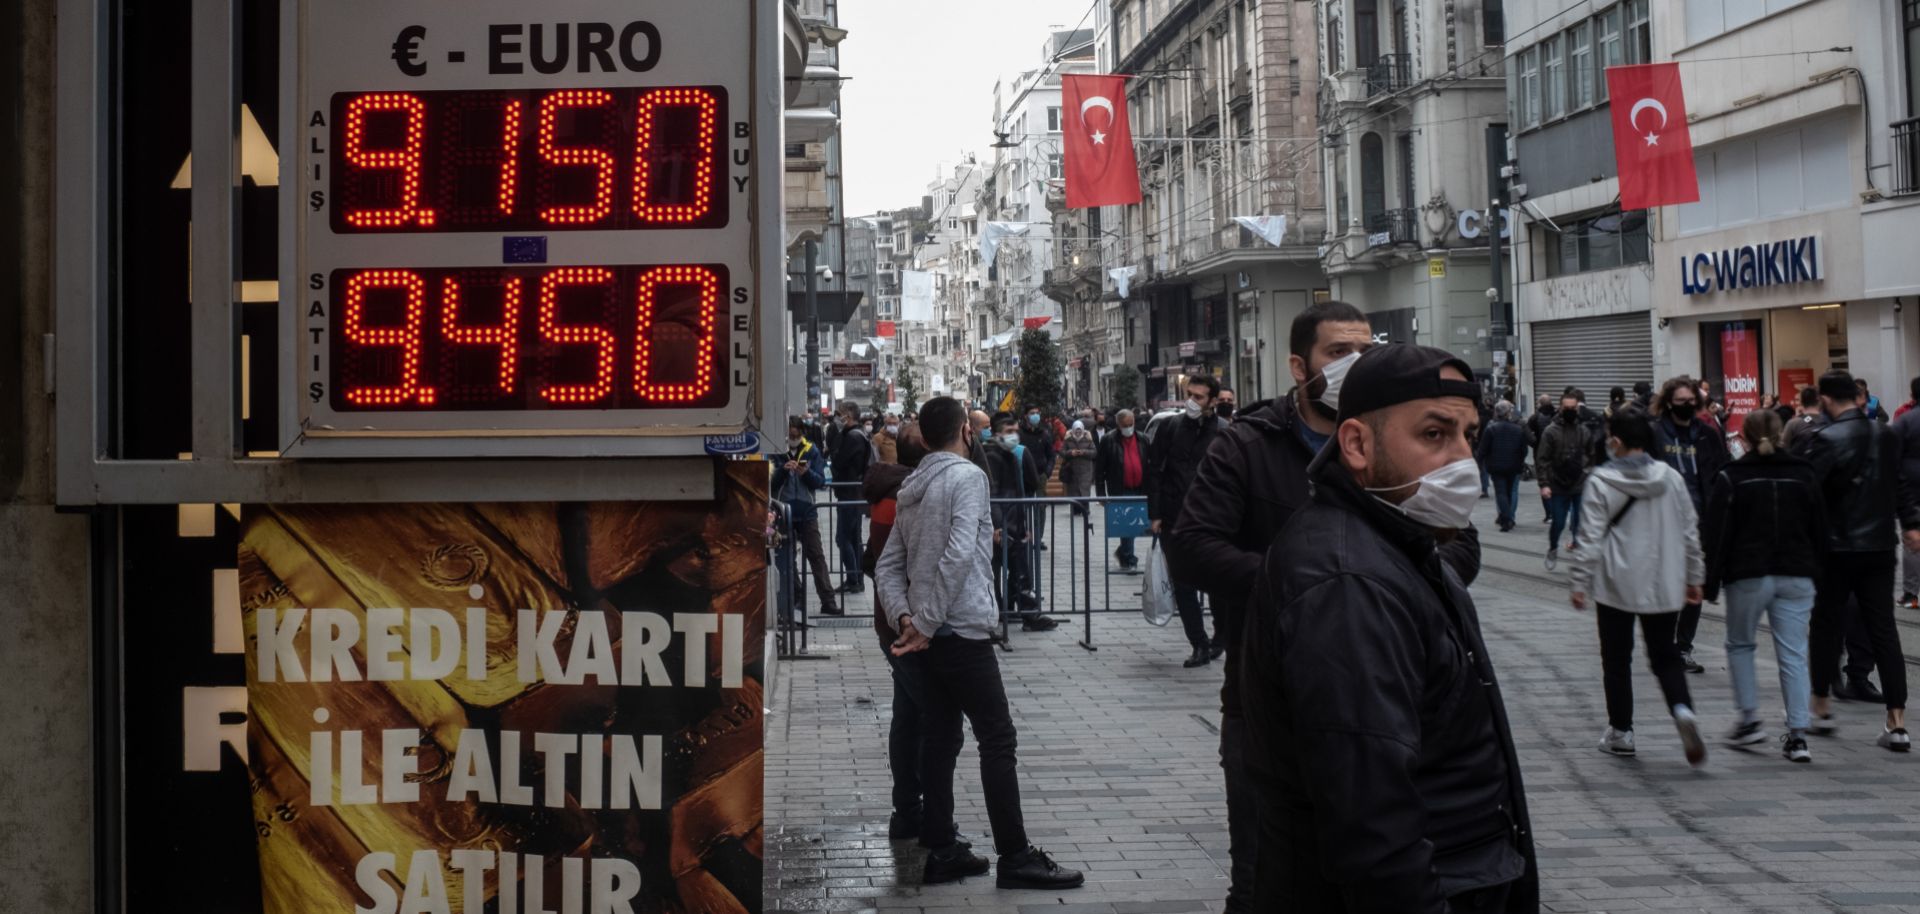  A currency exchange board in Istanbul shows the lira’s plummeting value after the unexpected firing of Turkey’s central bank chief on March 22, 2021.